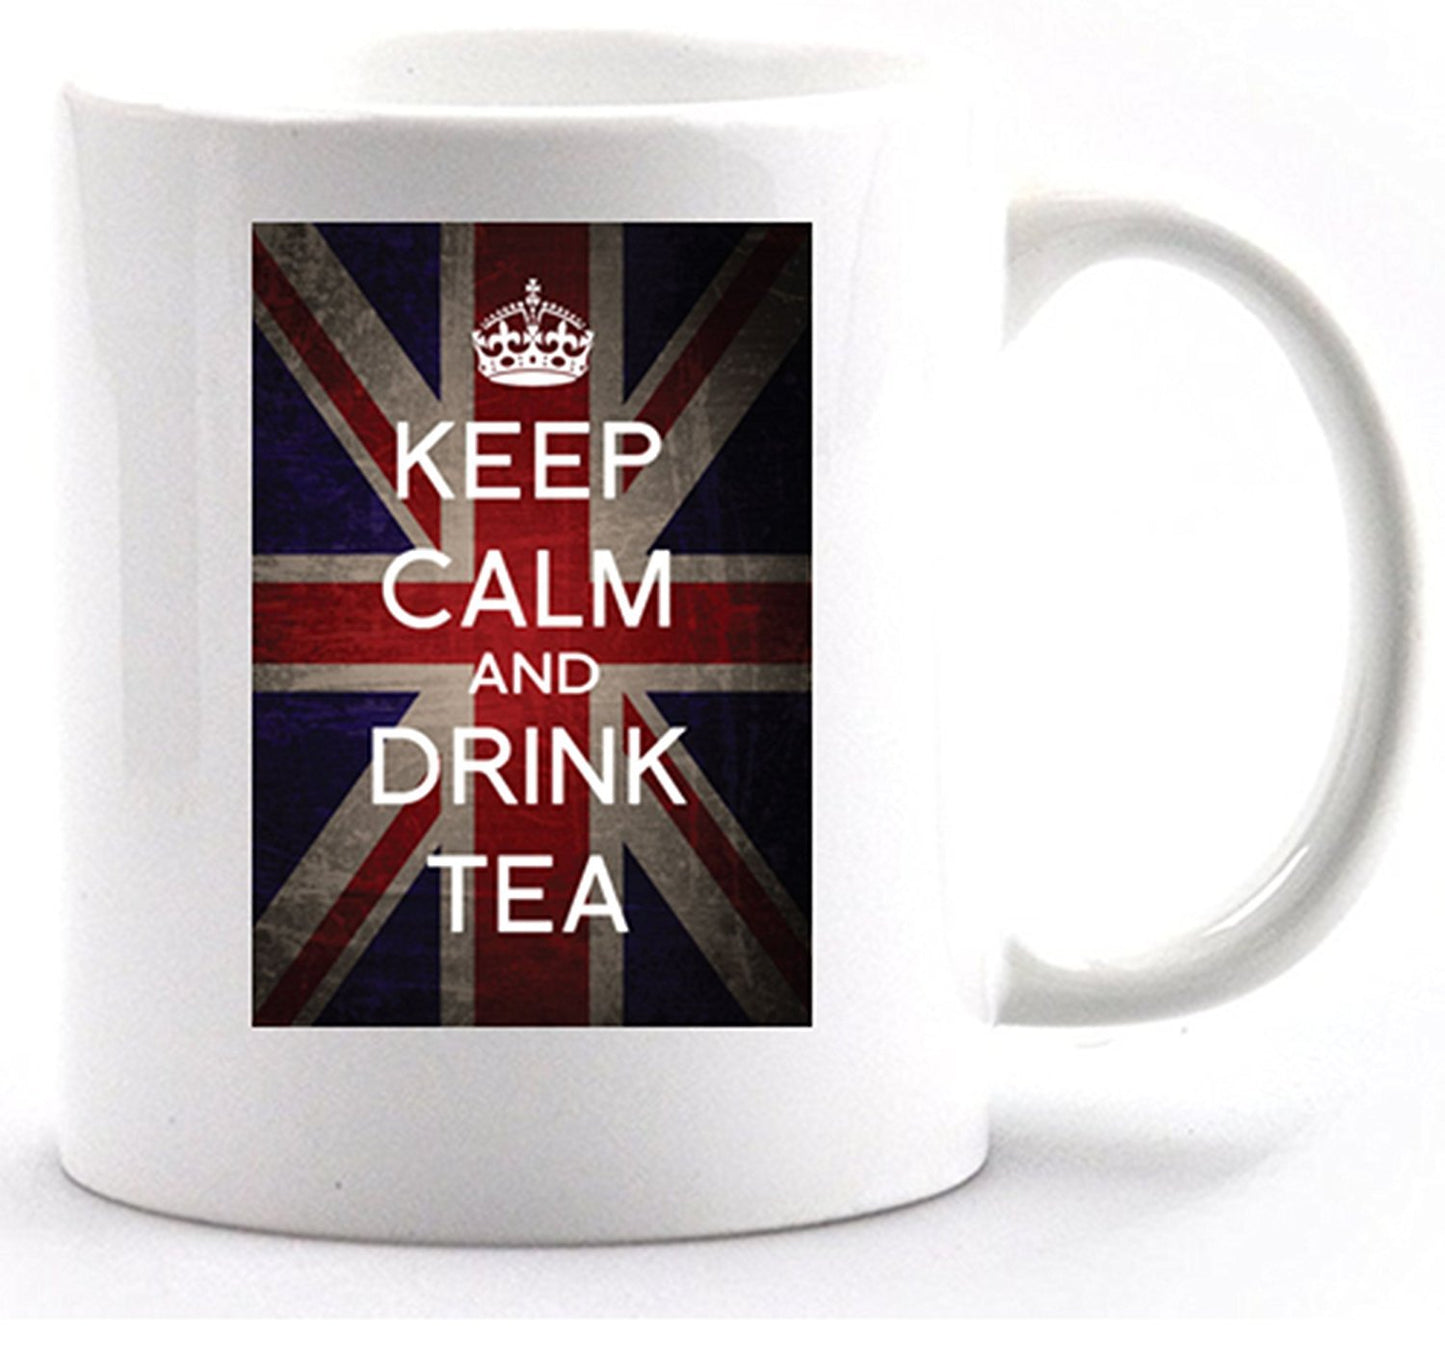 Keep Calm and drink tea mug with gift box - Army 1157 kit White Army 1157 Kit Veterans Owned Business